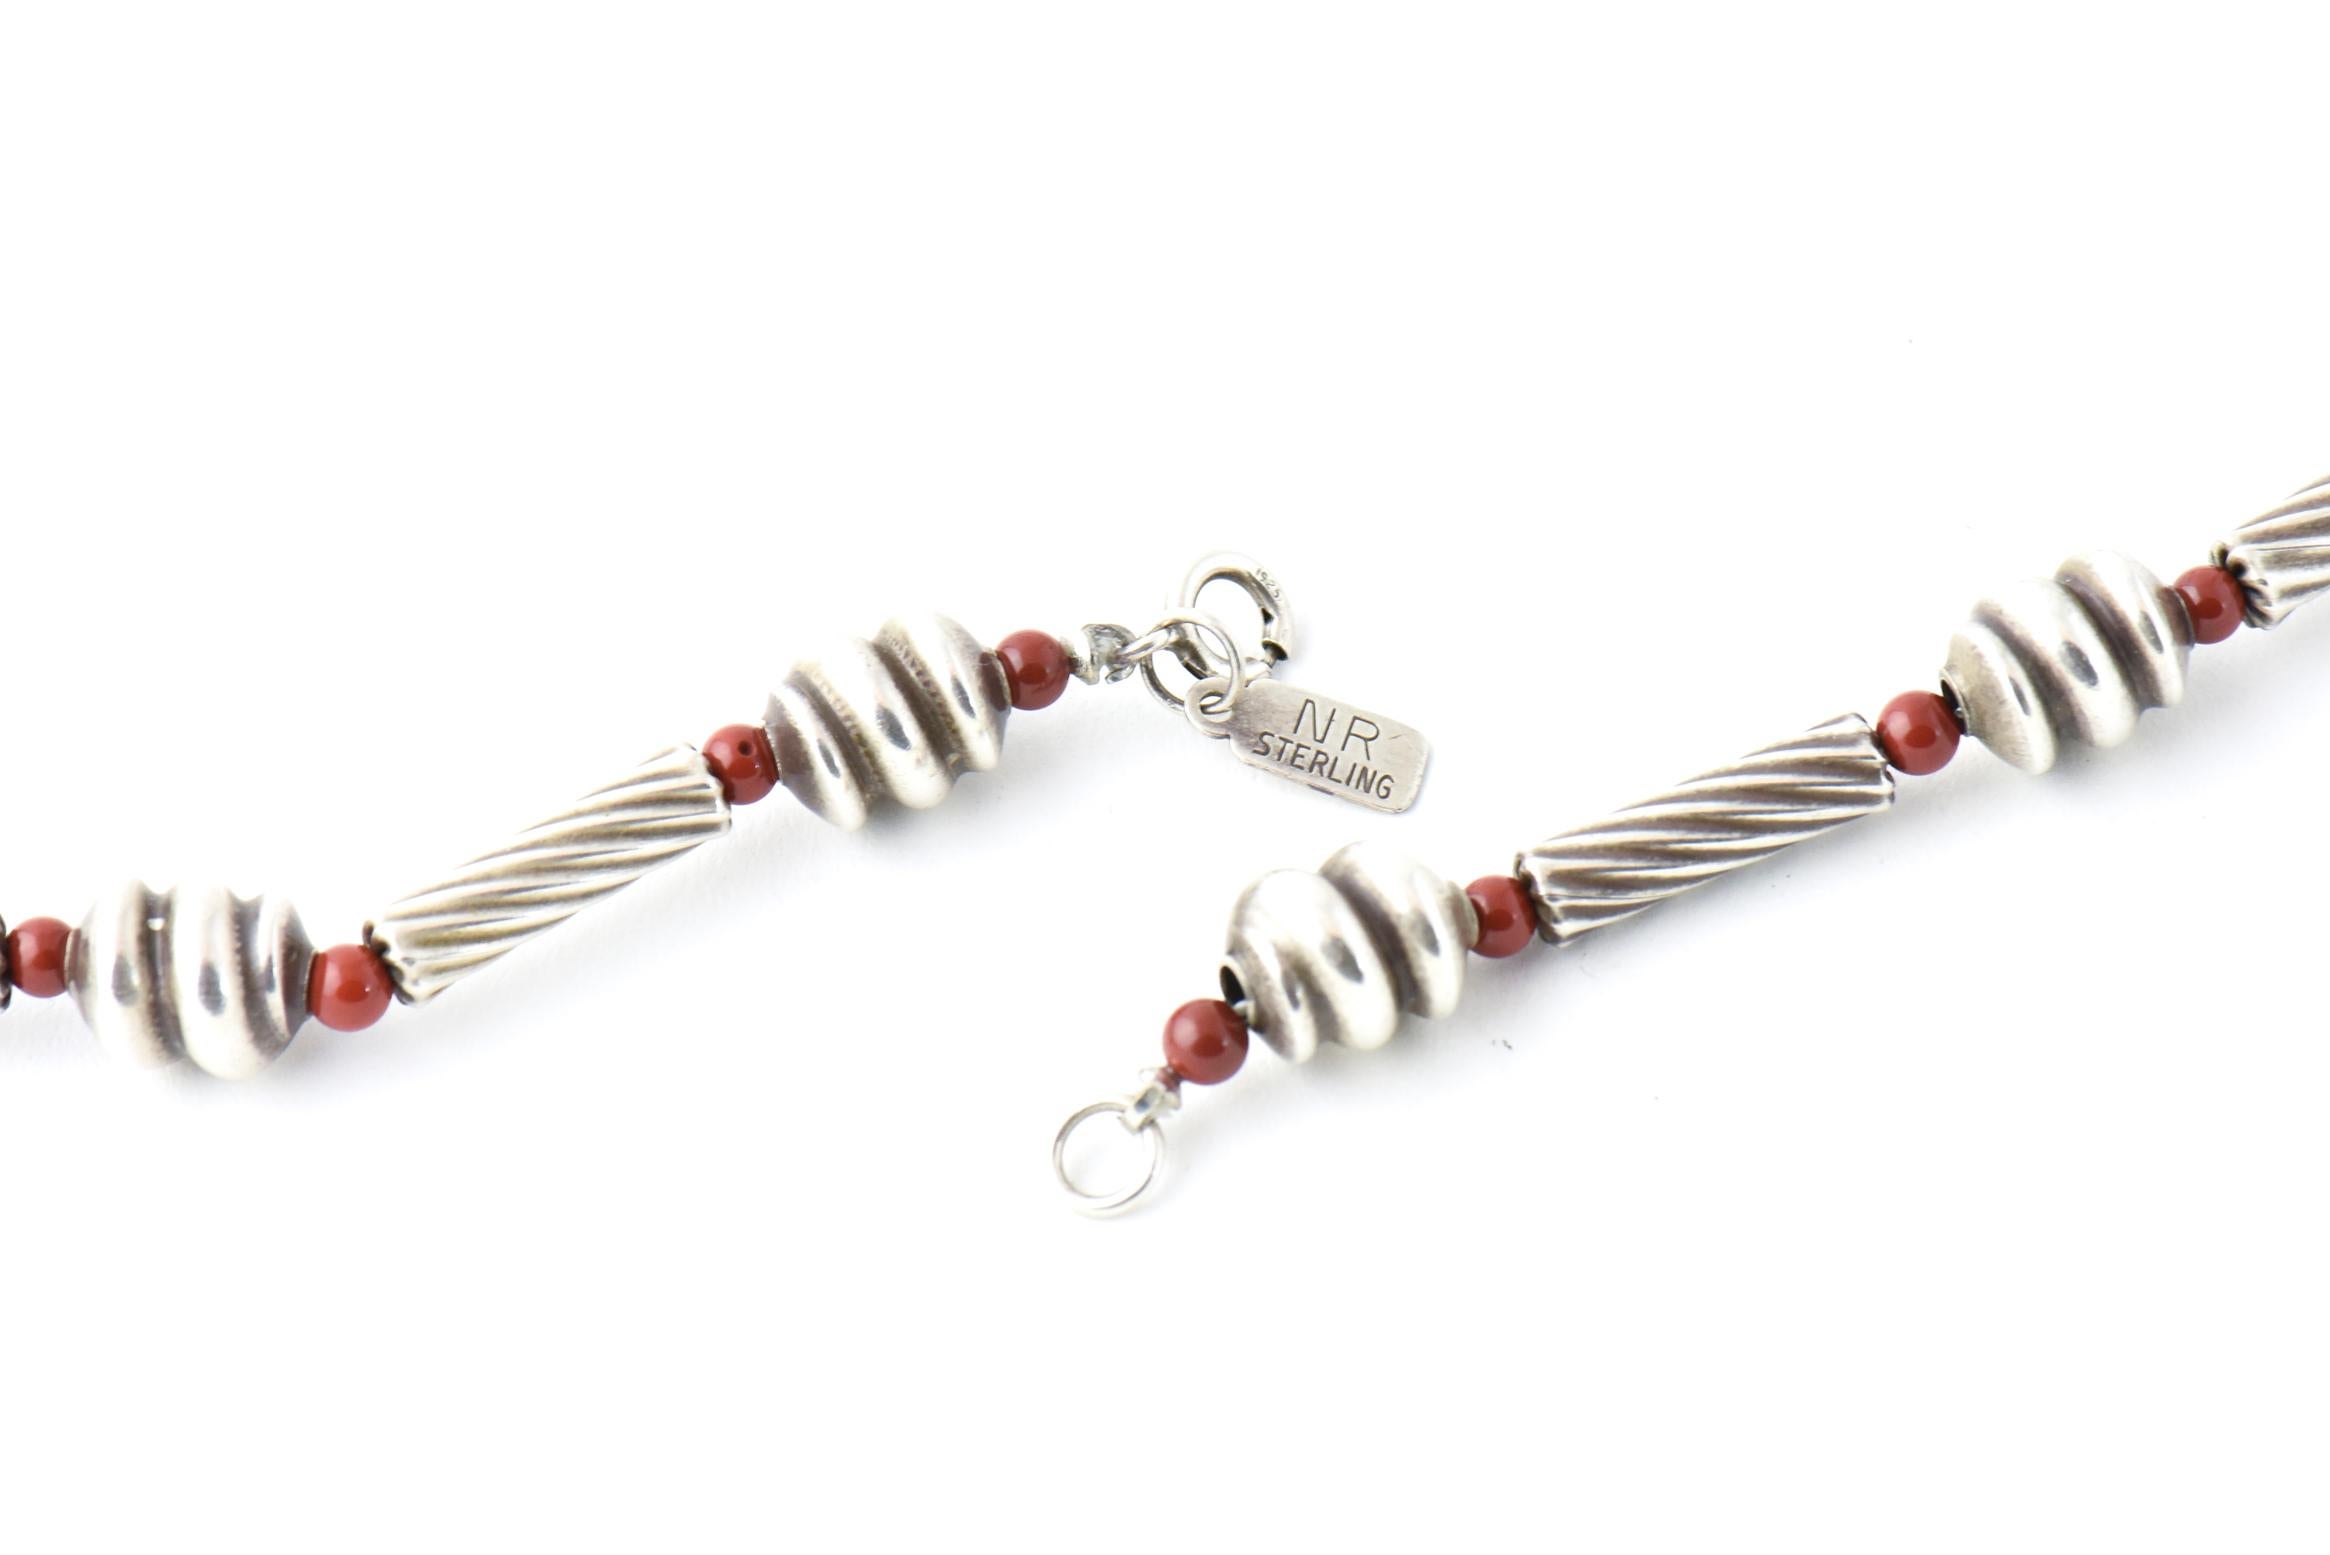 Stylized Sterling Silver and Jasper Bead Long Necklace by Nancy & Rise For Sale 1